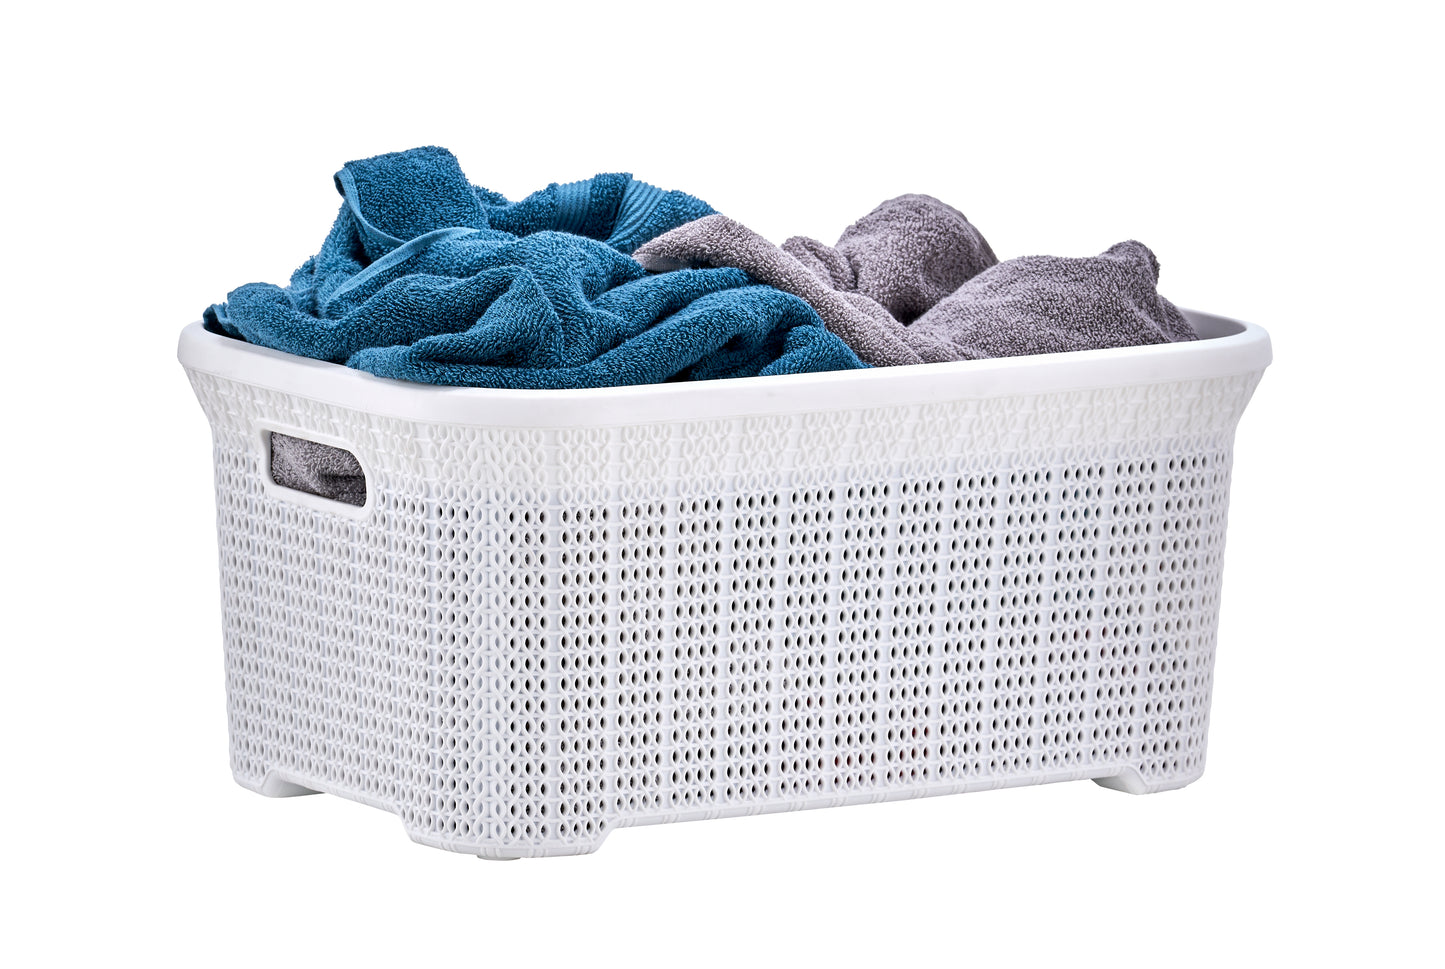 40-liter Knit Style Laundry Basket with Cutout Handles.